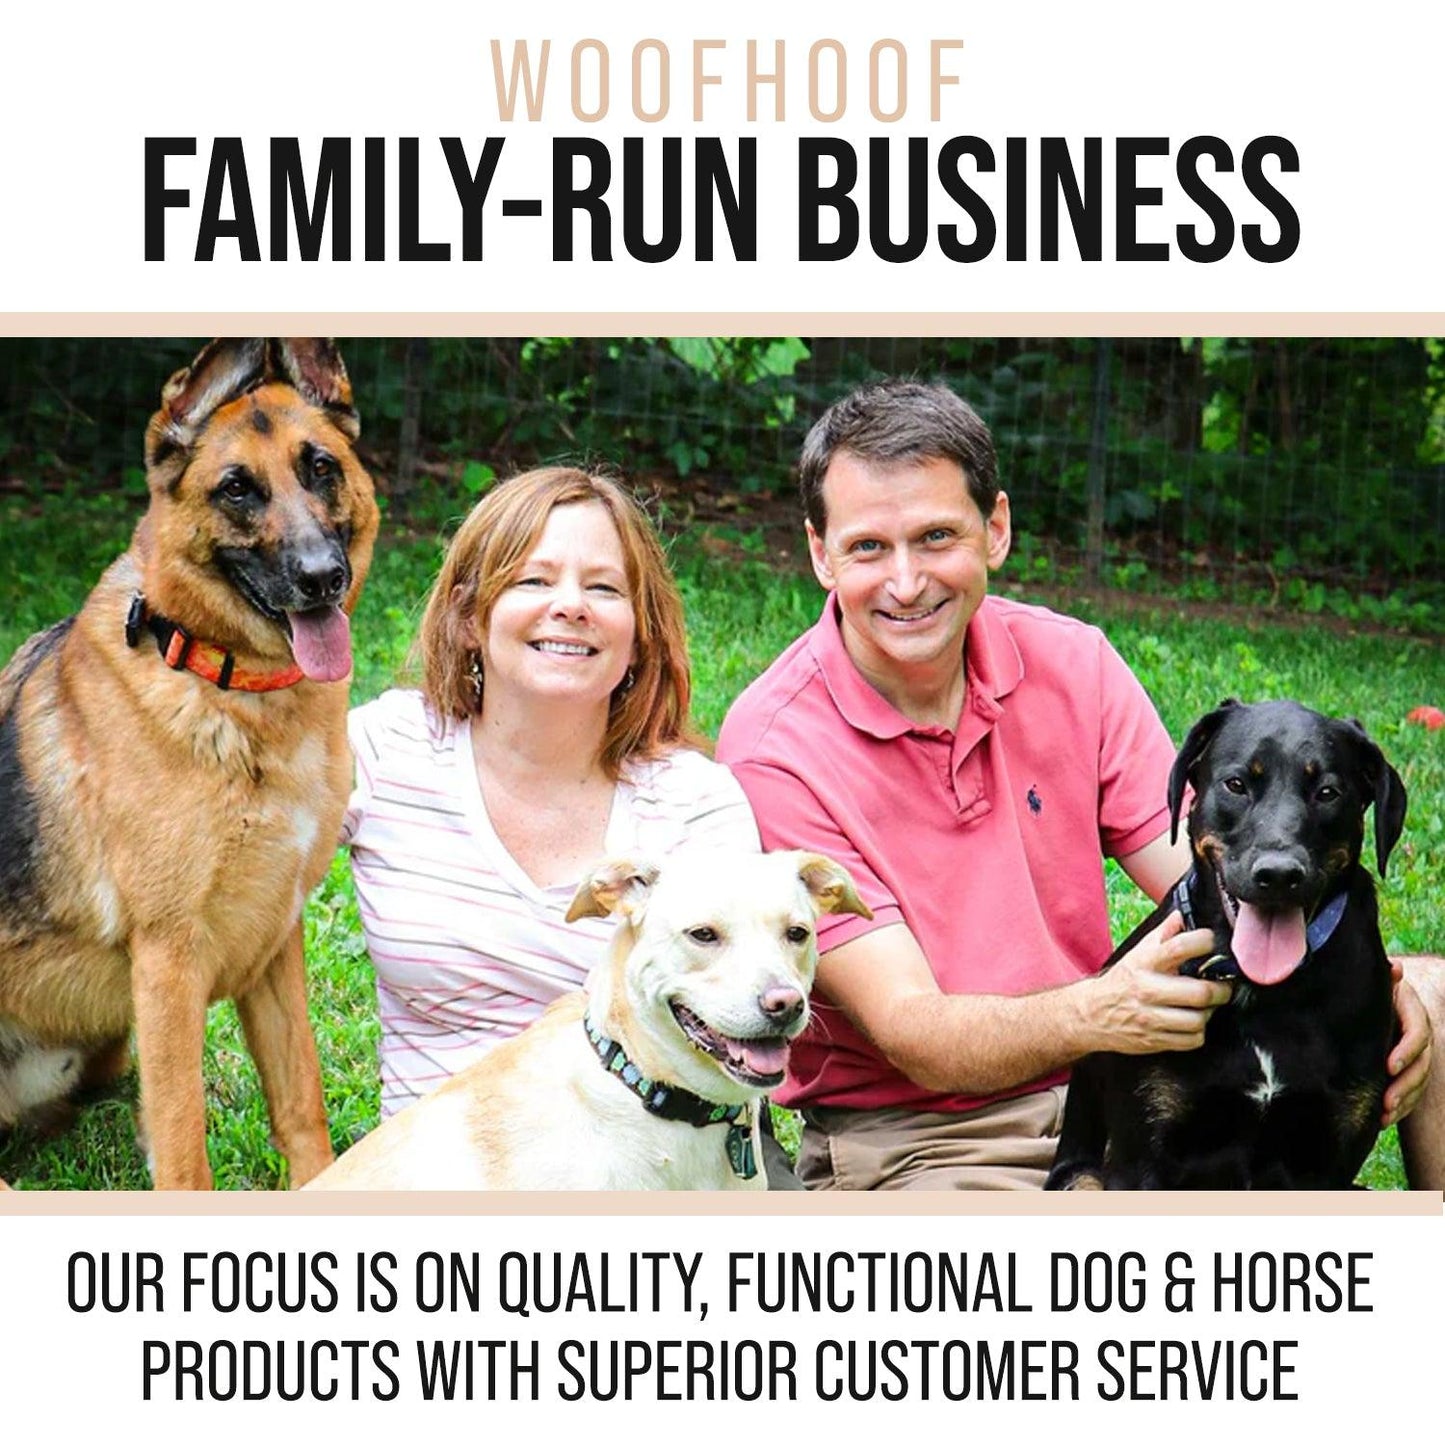 Woofhoof is a family run business with quality horse and dog products